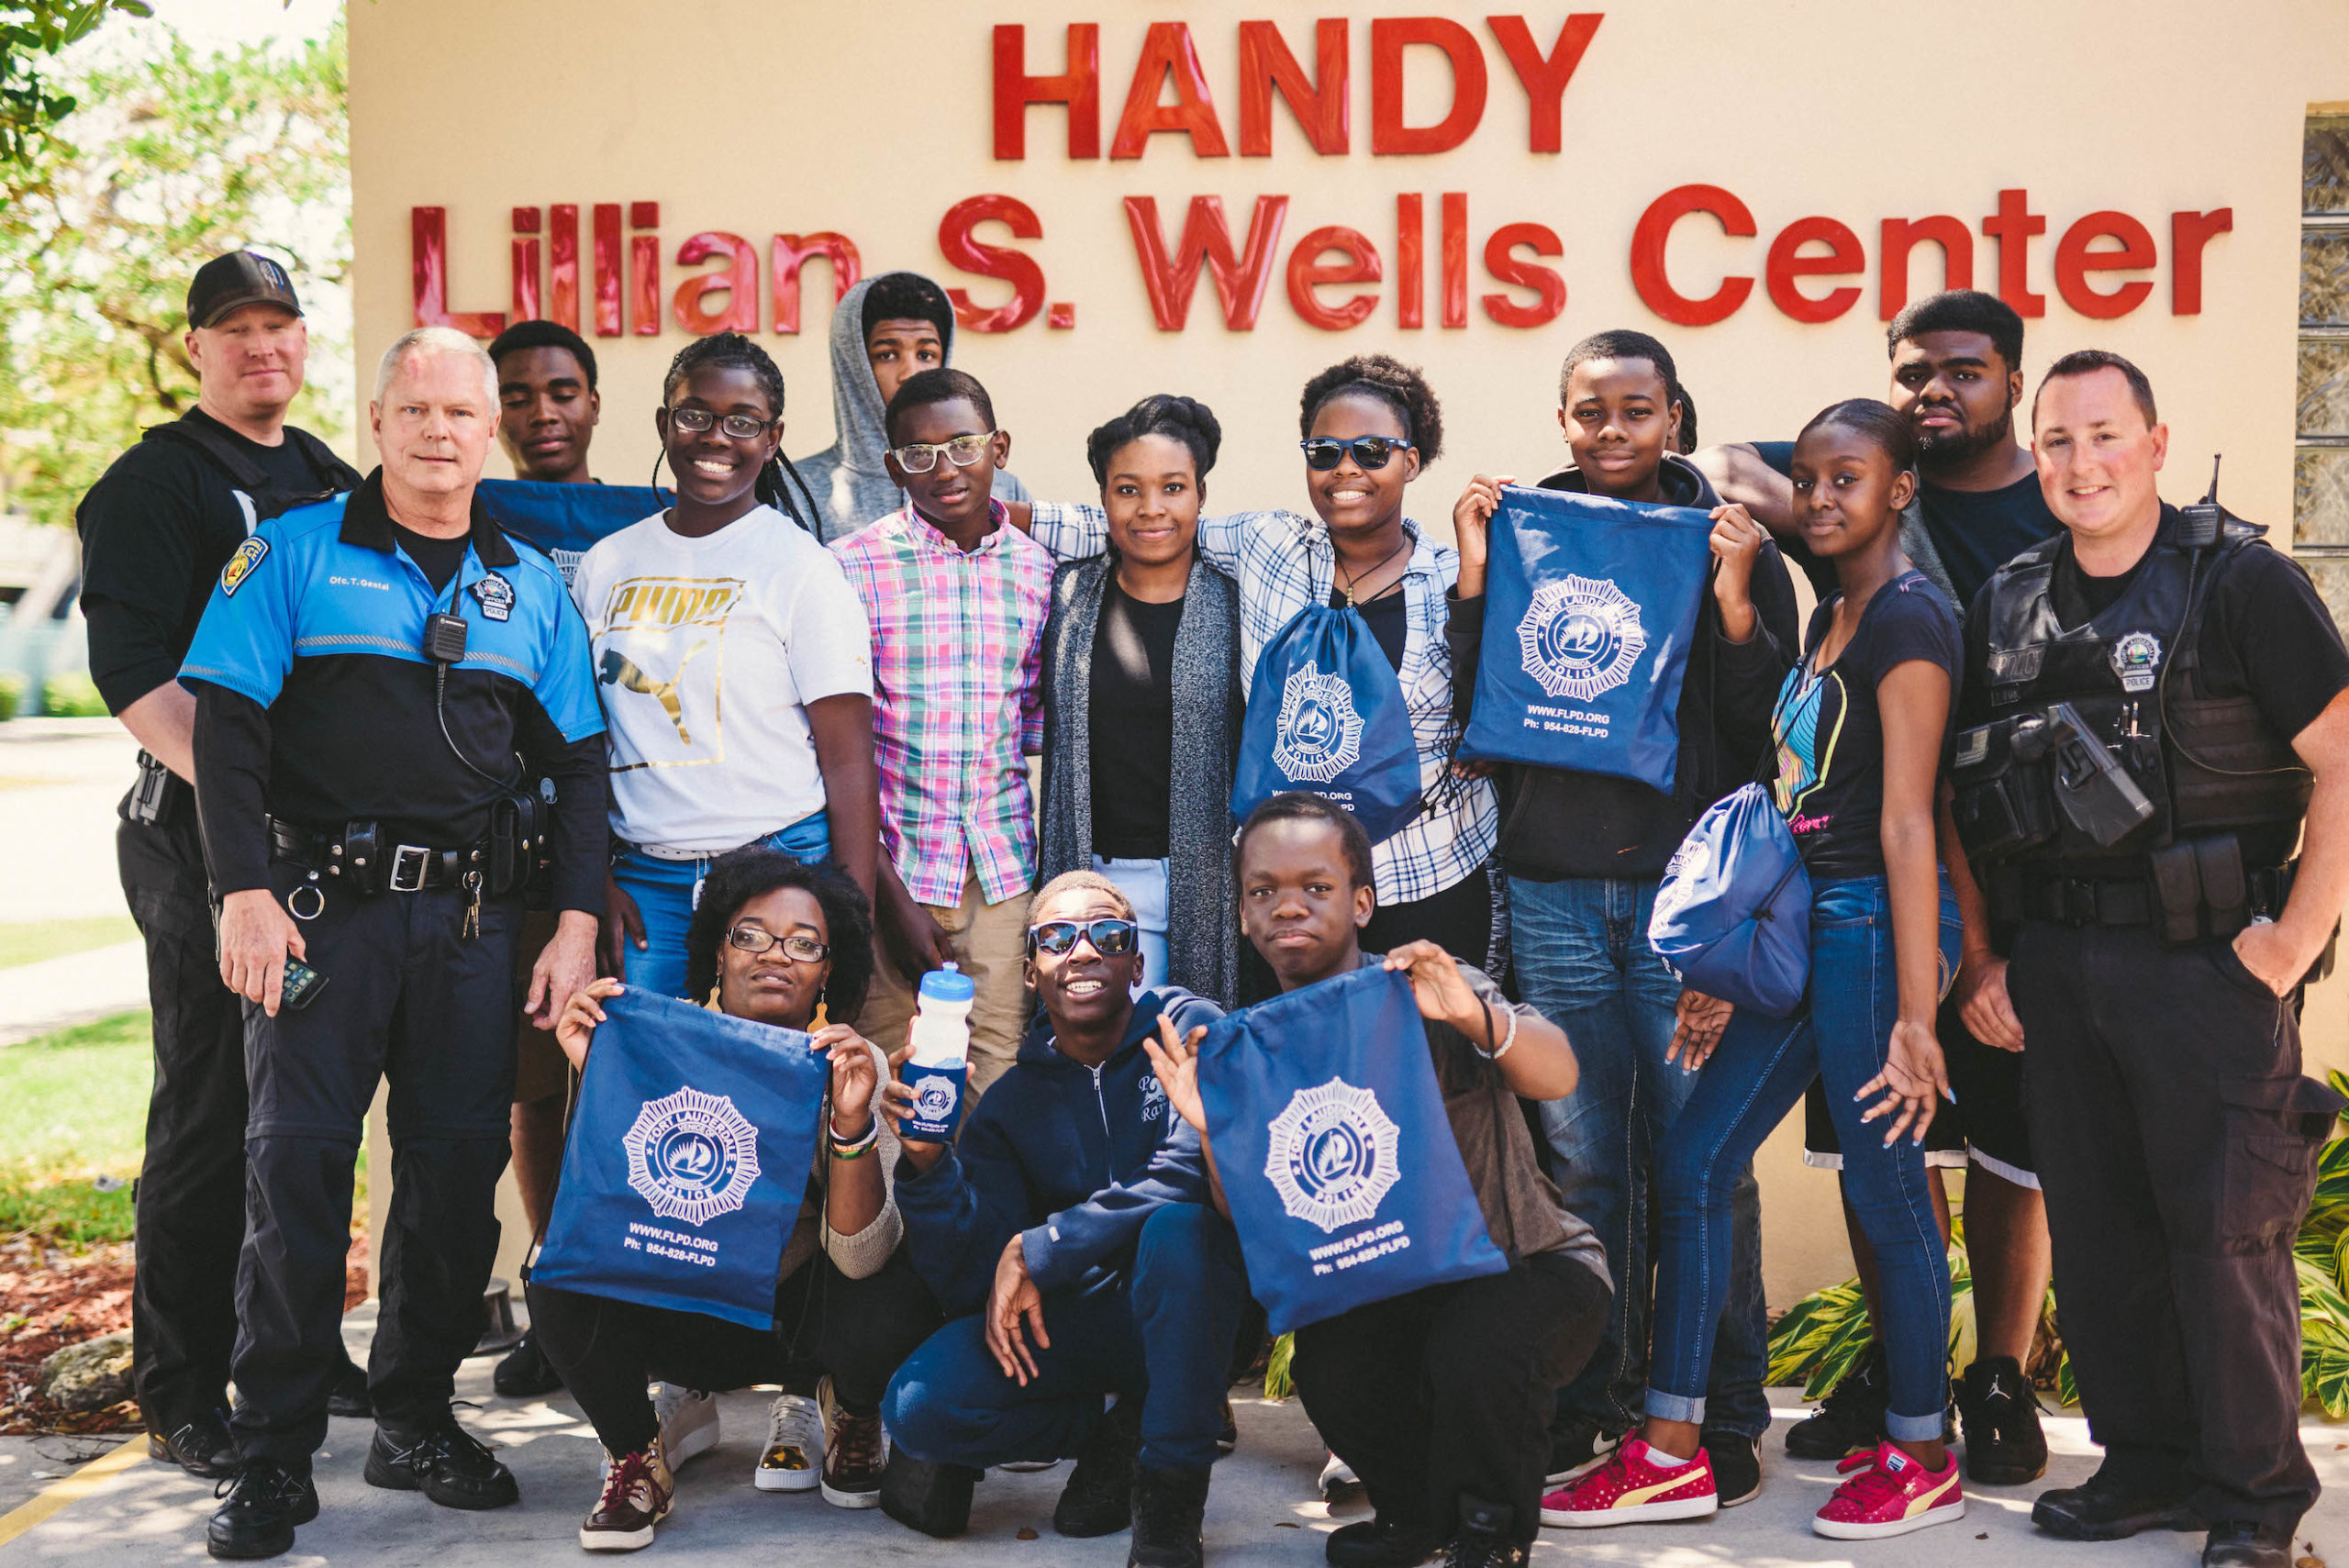 Young adults with two police officers posing in front of Handy Lillian S. Wells Center sign with some holing police logo bags and water bottle